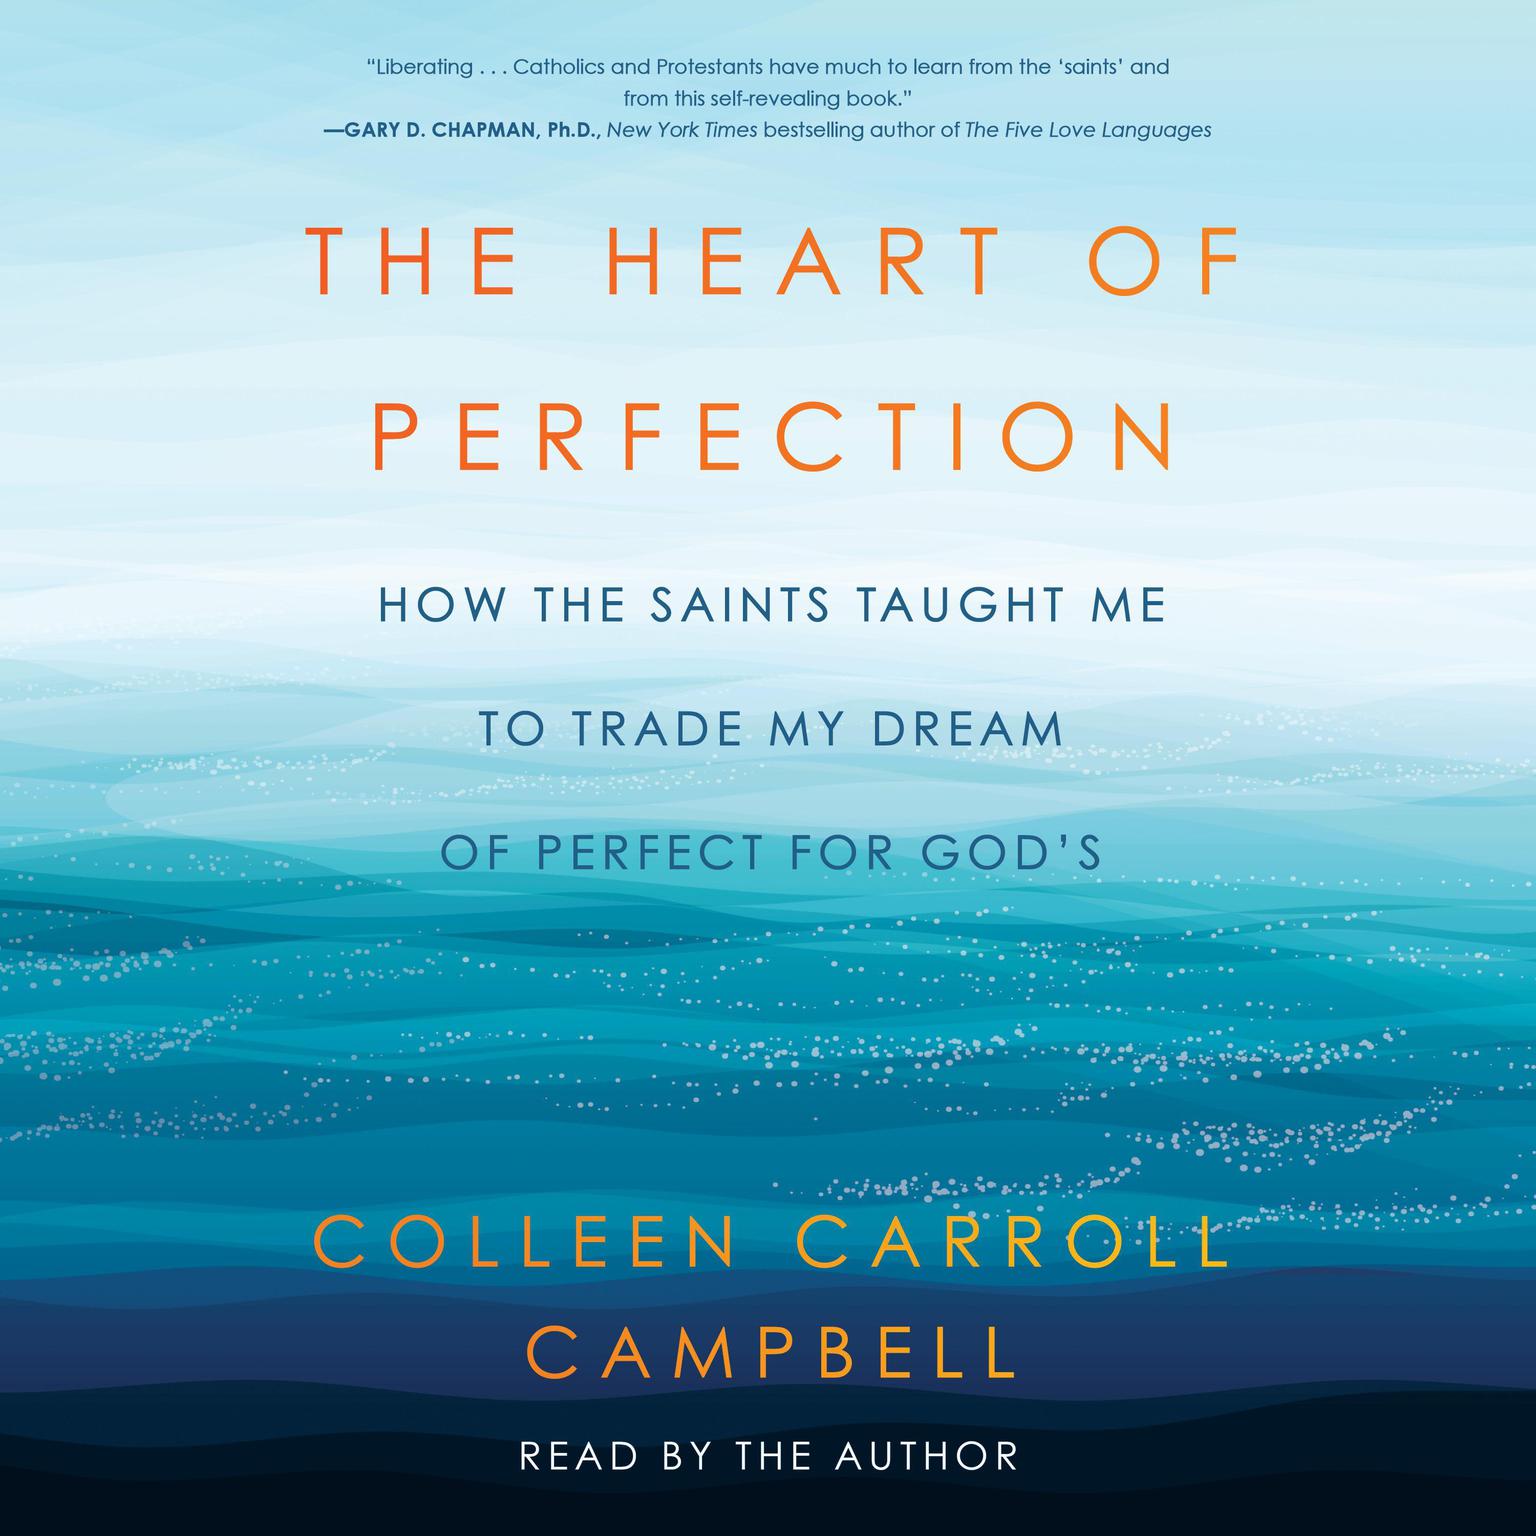 The Heart of Perfection: How the Saints Taught Me to Trade My Dream of Perfect for Gods Audiobook, by Colleen Carroll Campbell